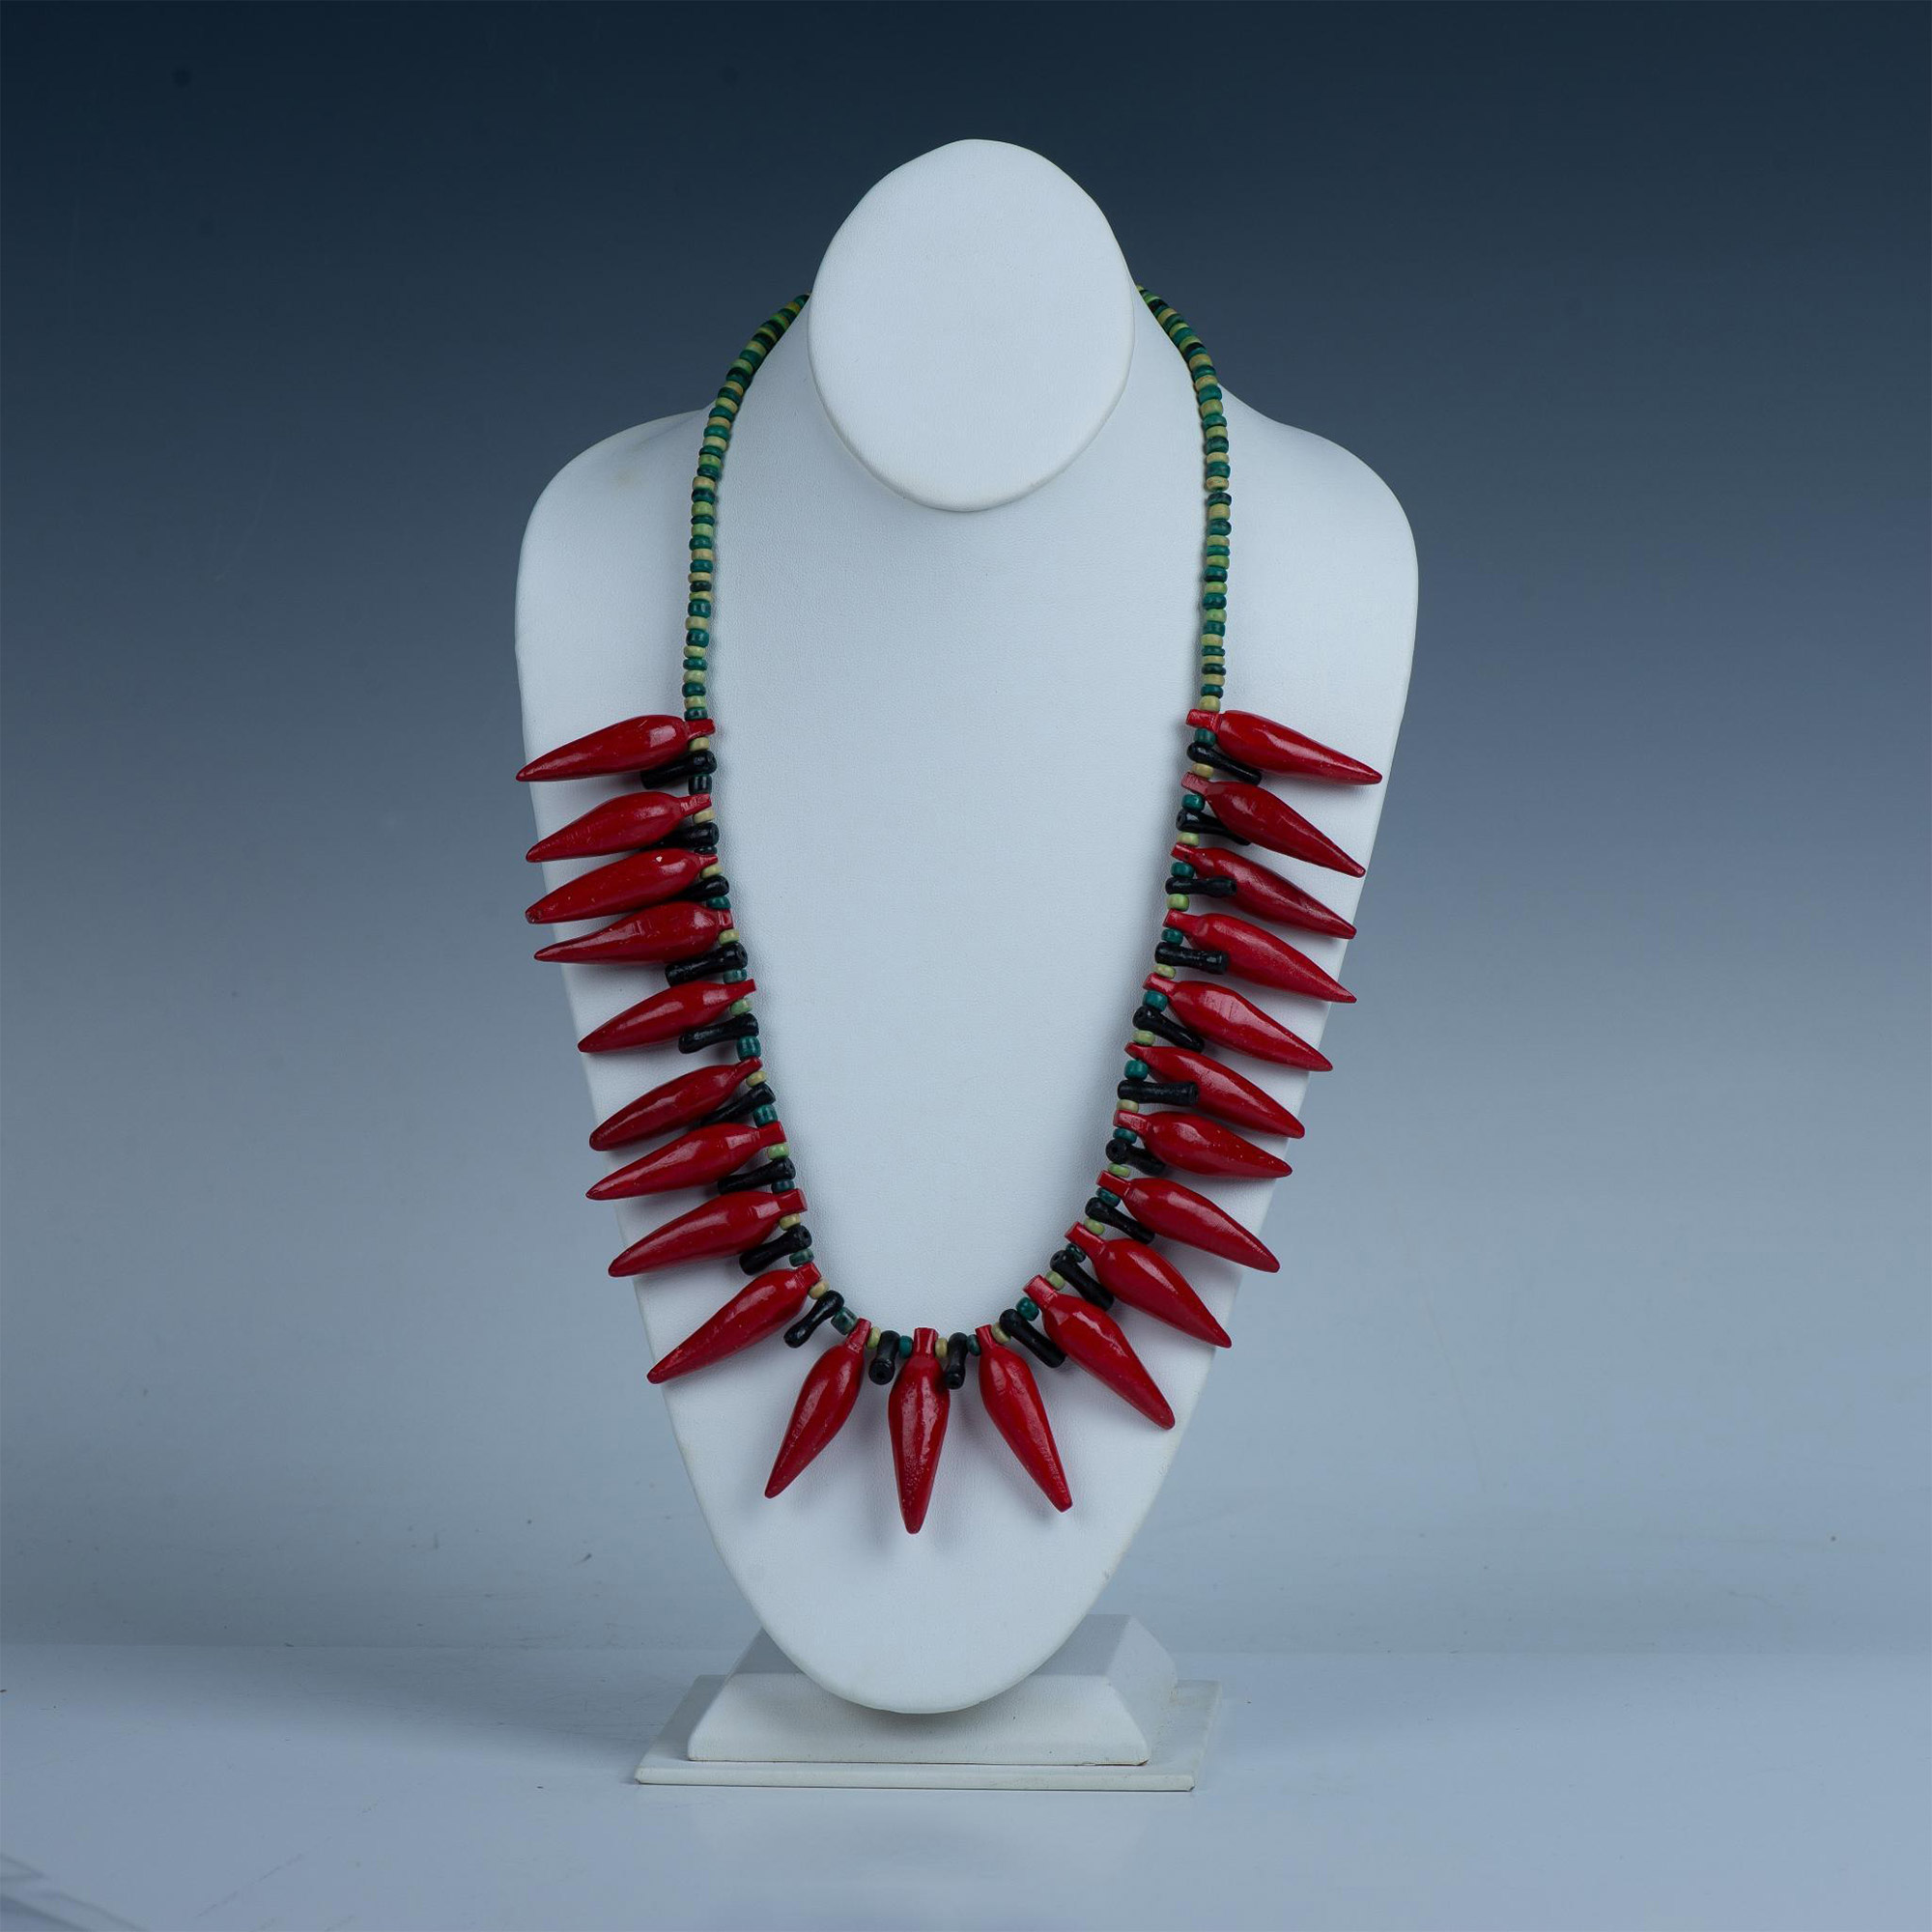 Retro Wood Red Chili Pepper Necklace